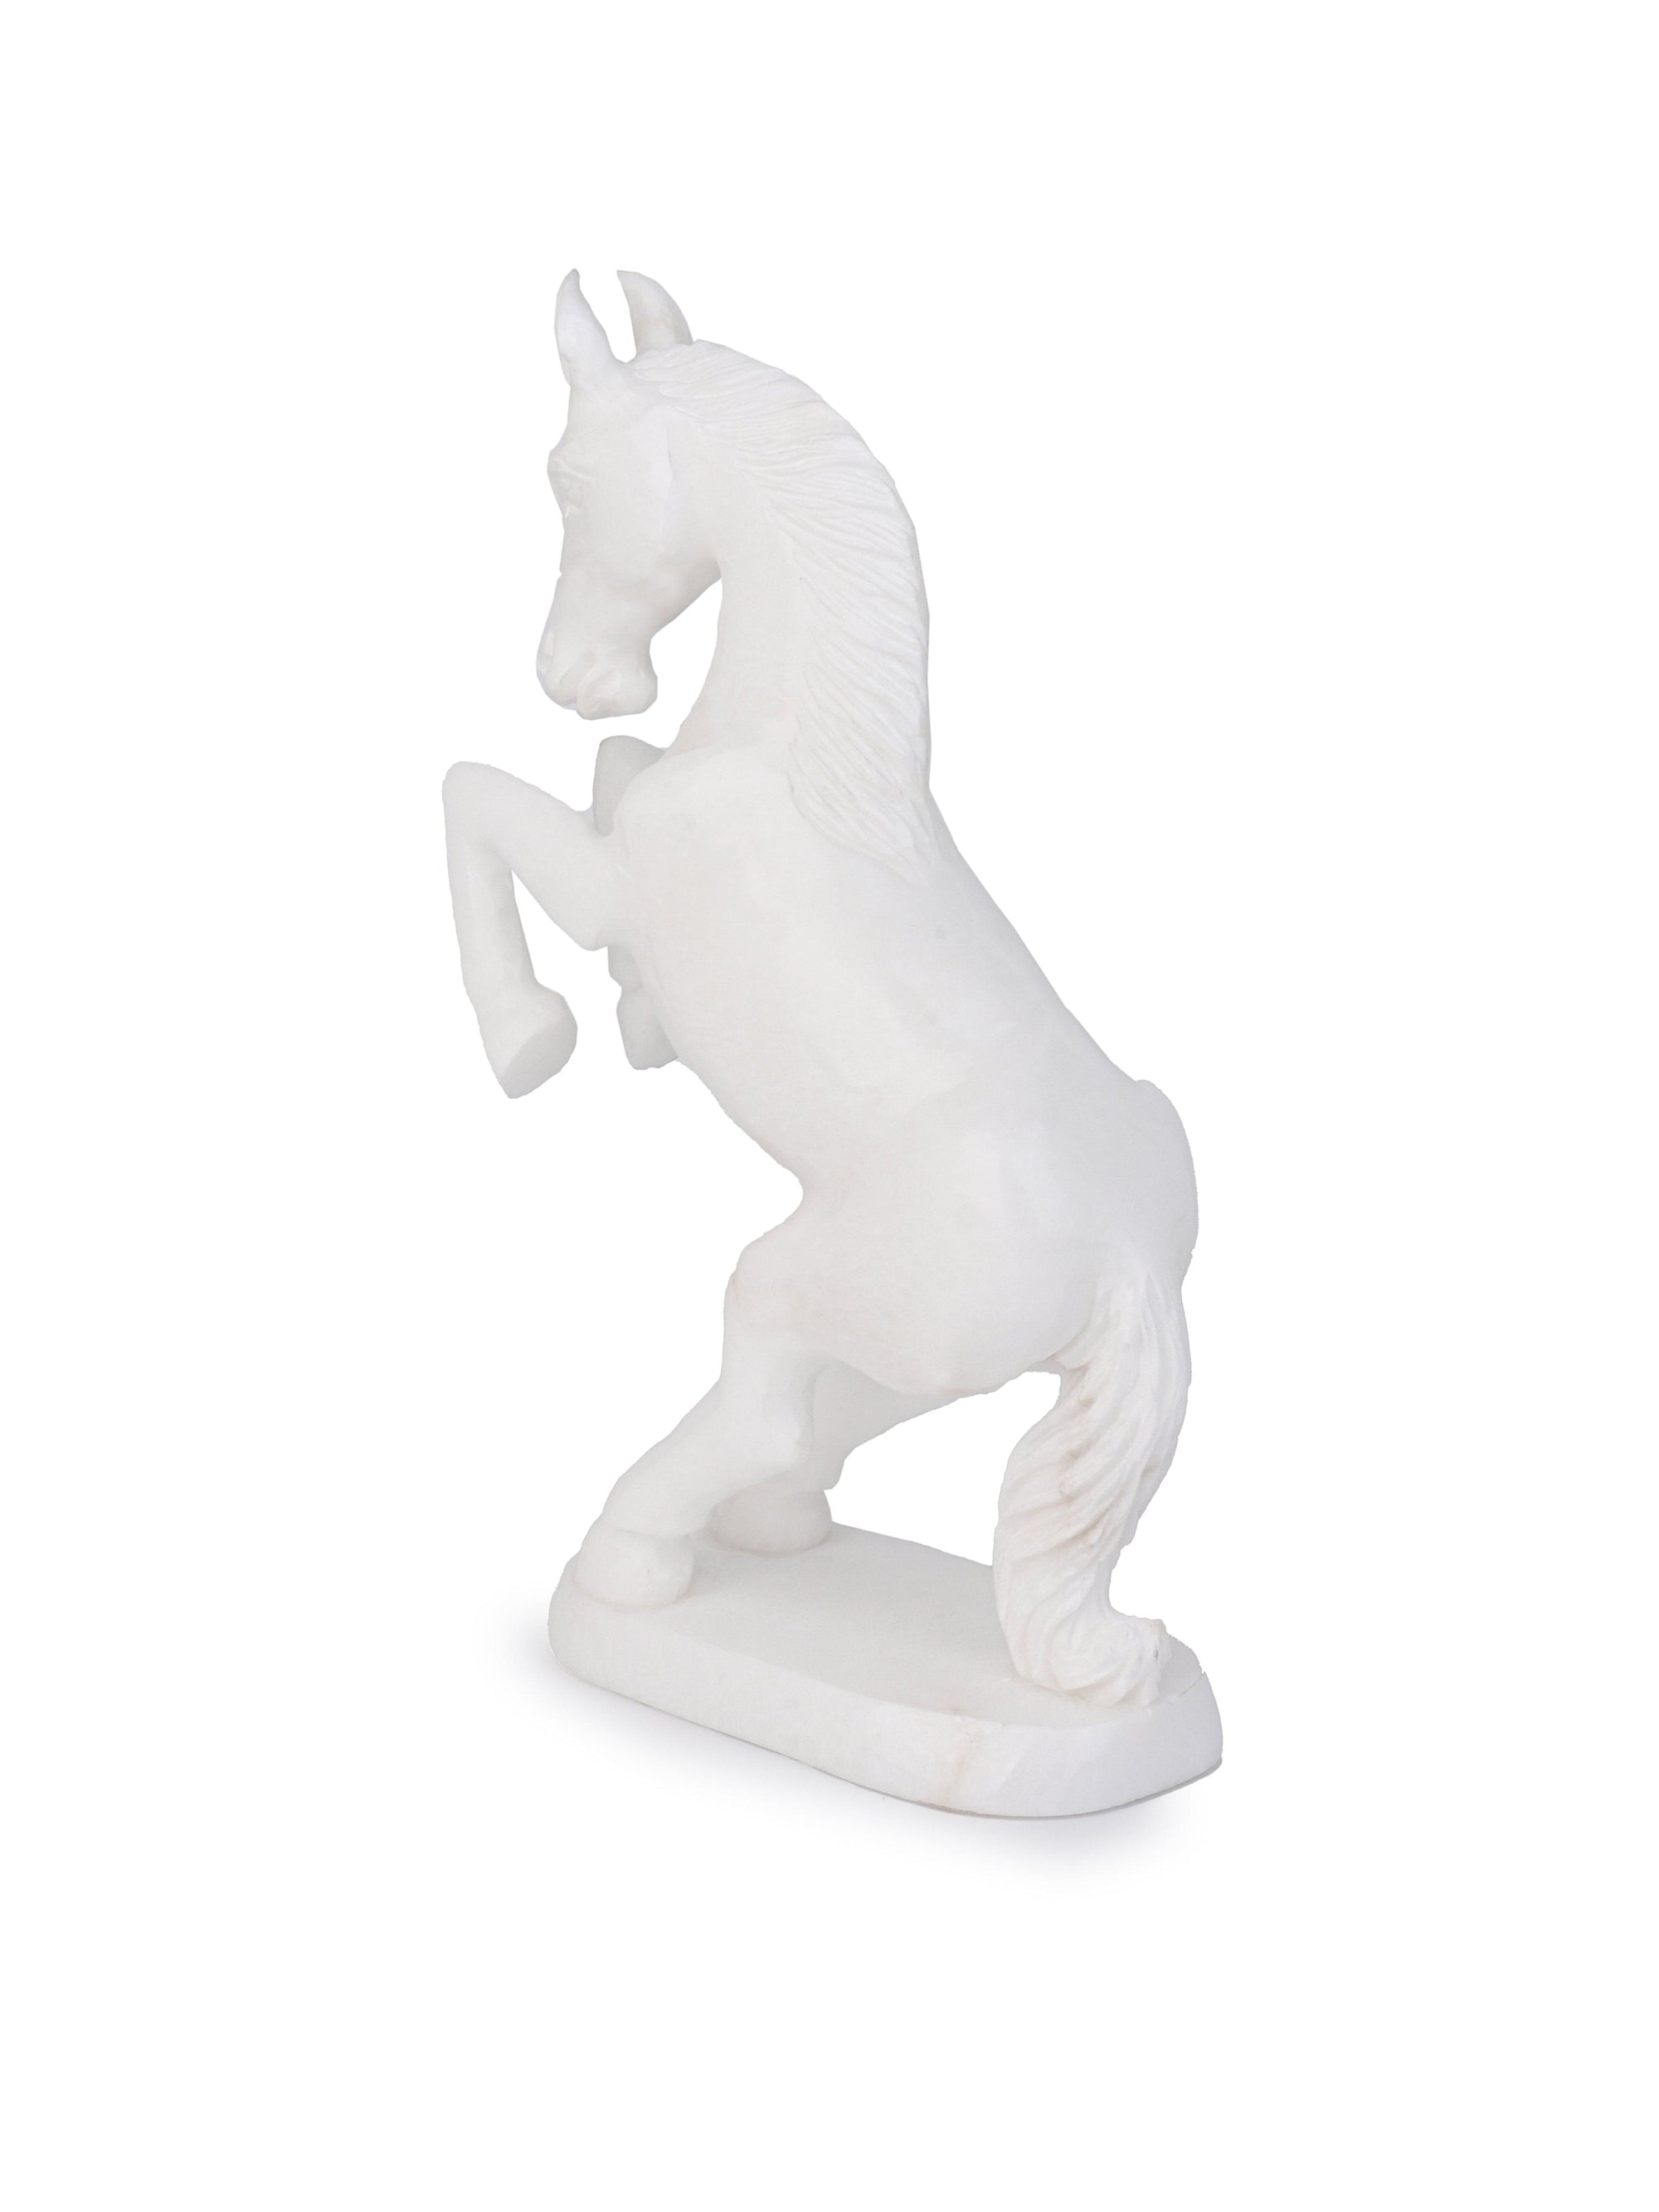 Marble Crafted Rearing Horse Sculpture for Home Office Decor - 10 inches